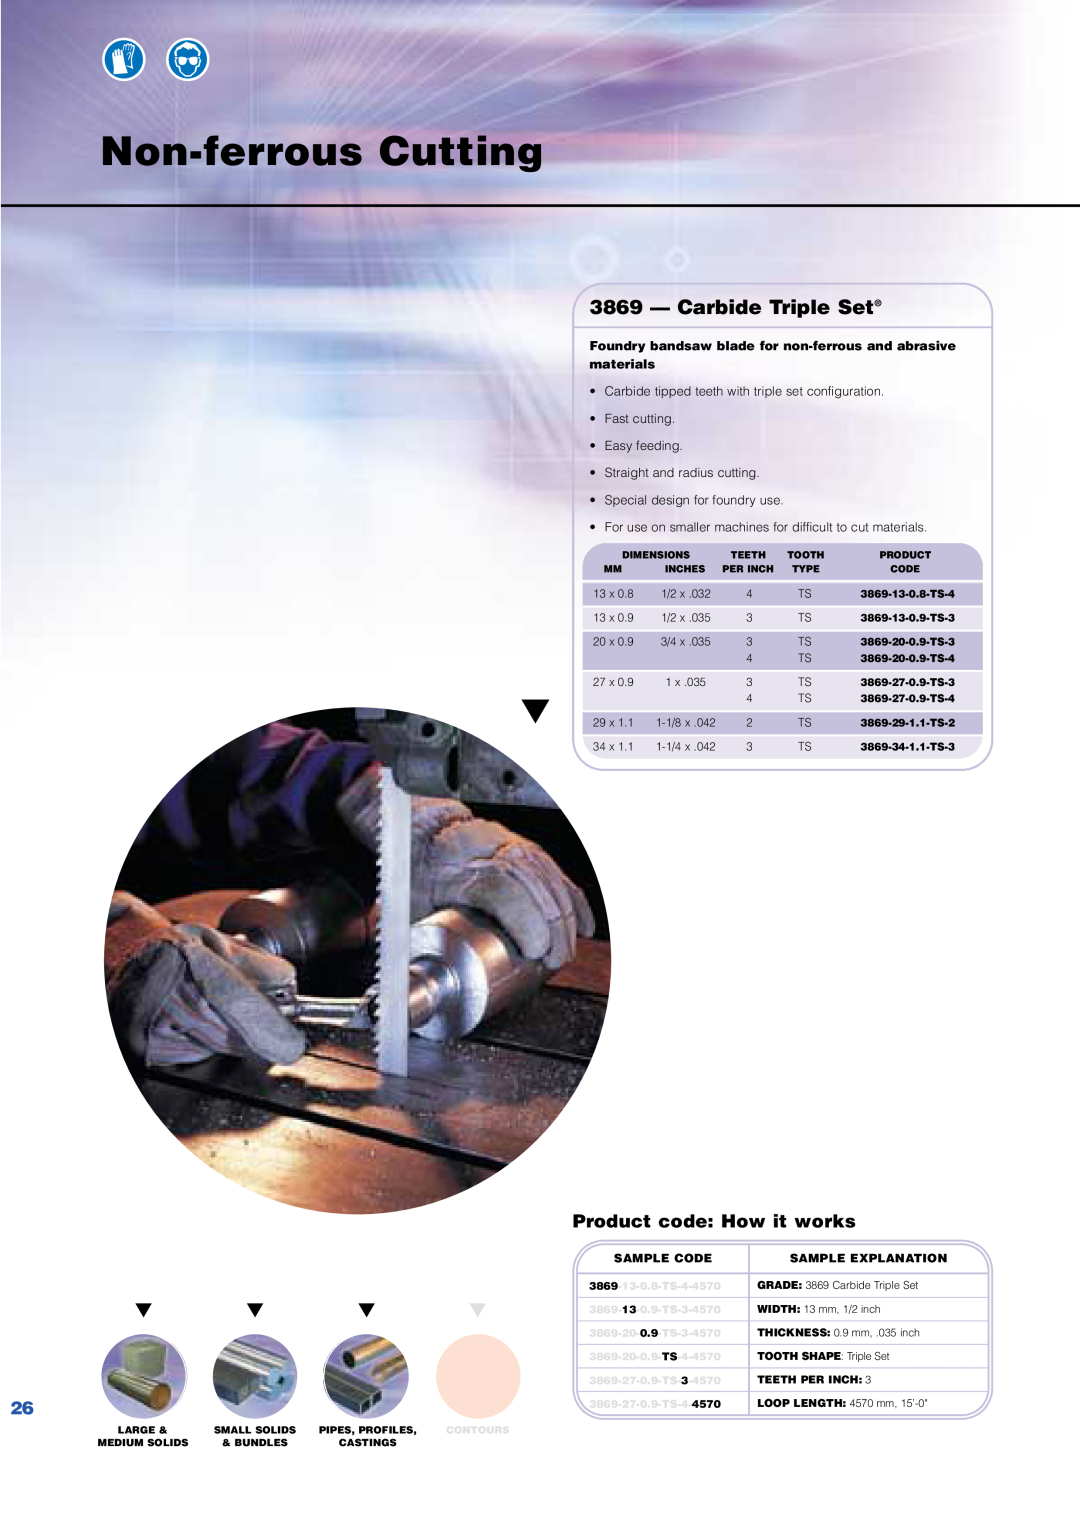 Bahco Saw Carbide Triple Set, Non-ferrous Cutting, Foundry bandsaw blade for non-ferrous and abrasive materials, TS-4-4570 